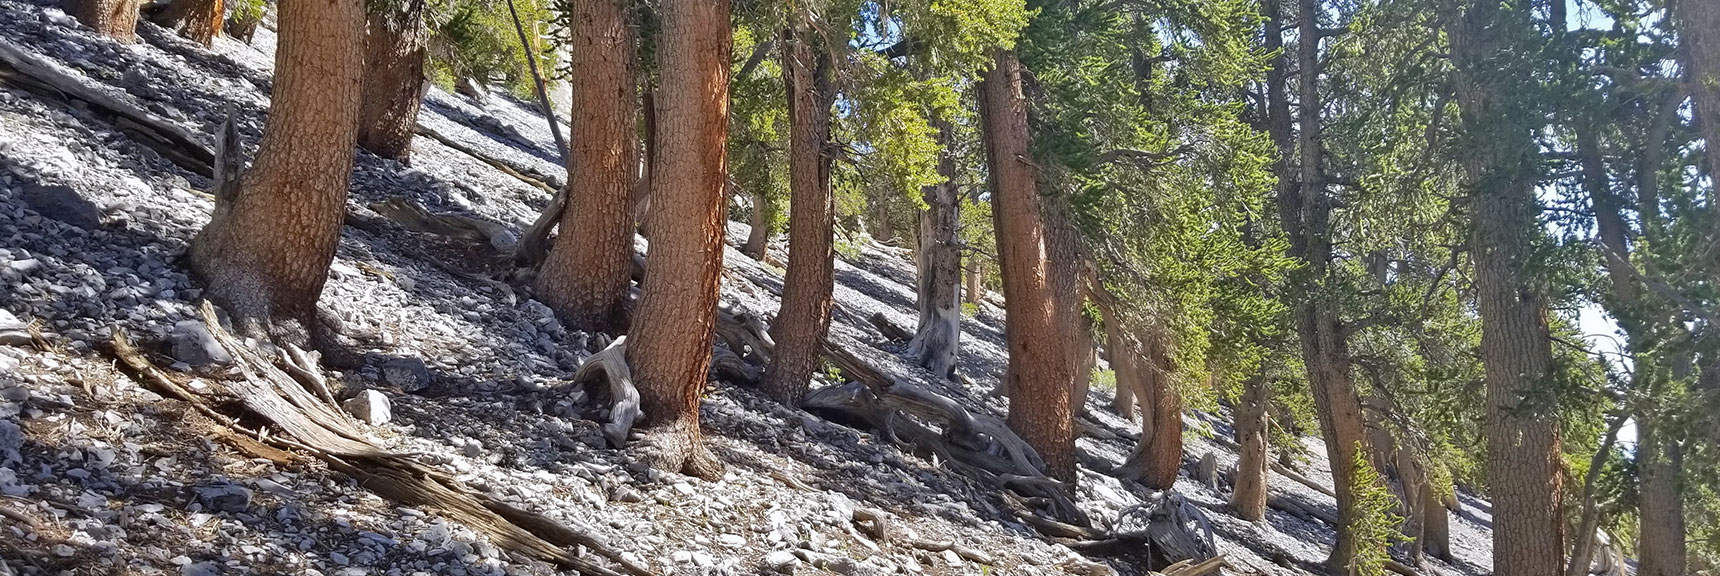 Bristlecone Pine Trees on an Avalanche Slope East of Mummy Mountain | Mummy Mountain Northeast Approach Wilderness Navigation, Nevada